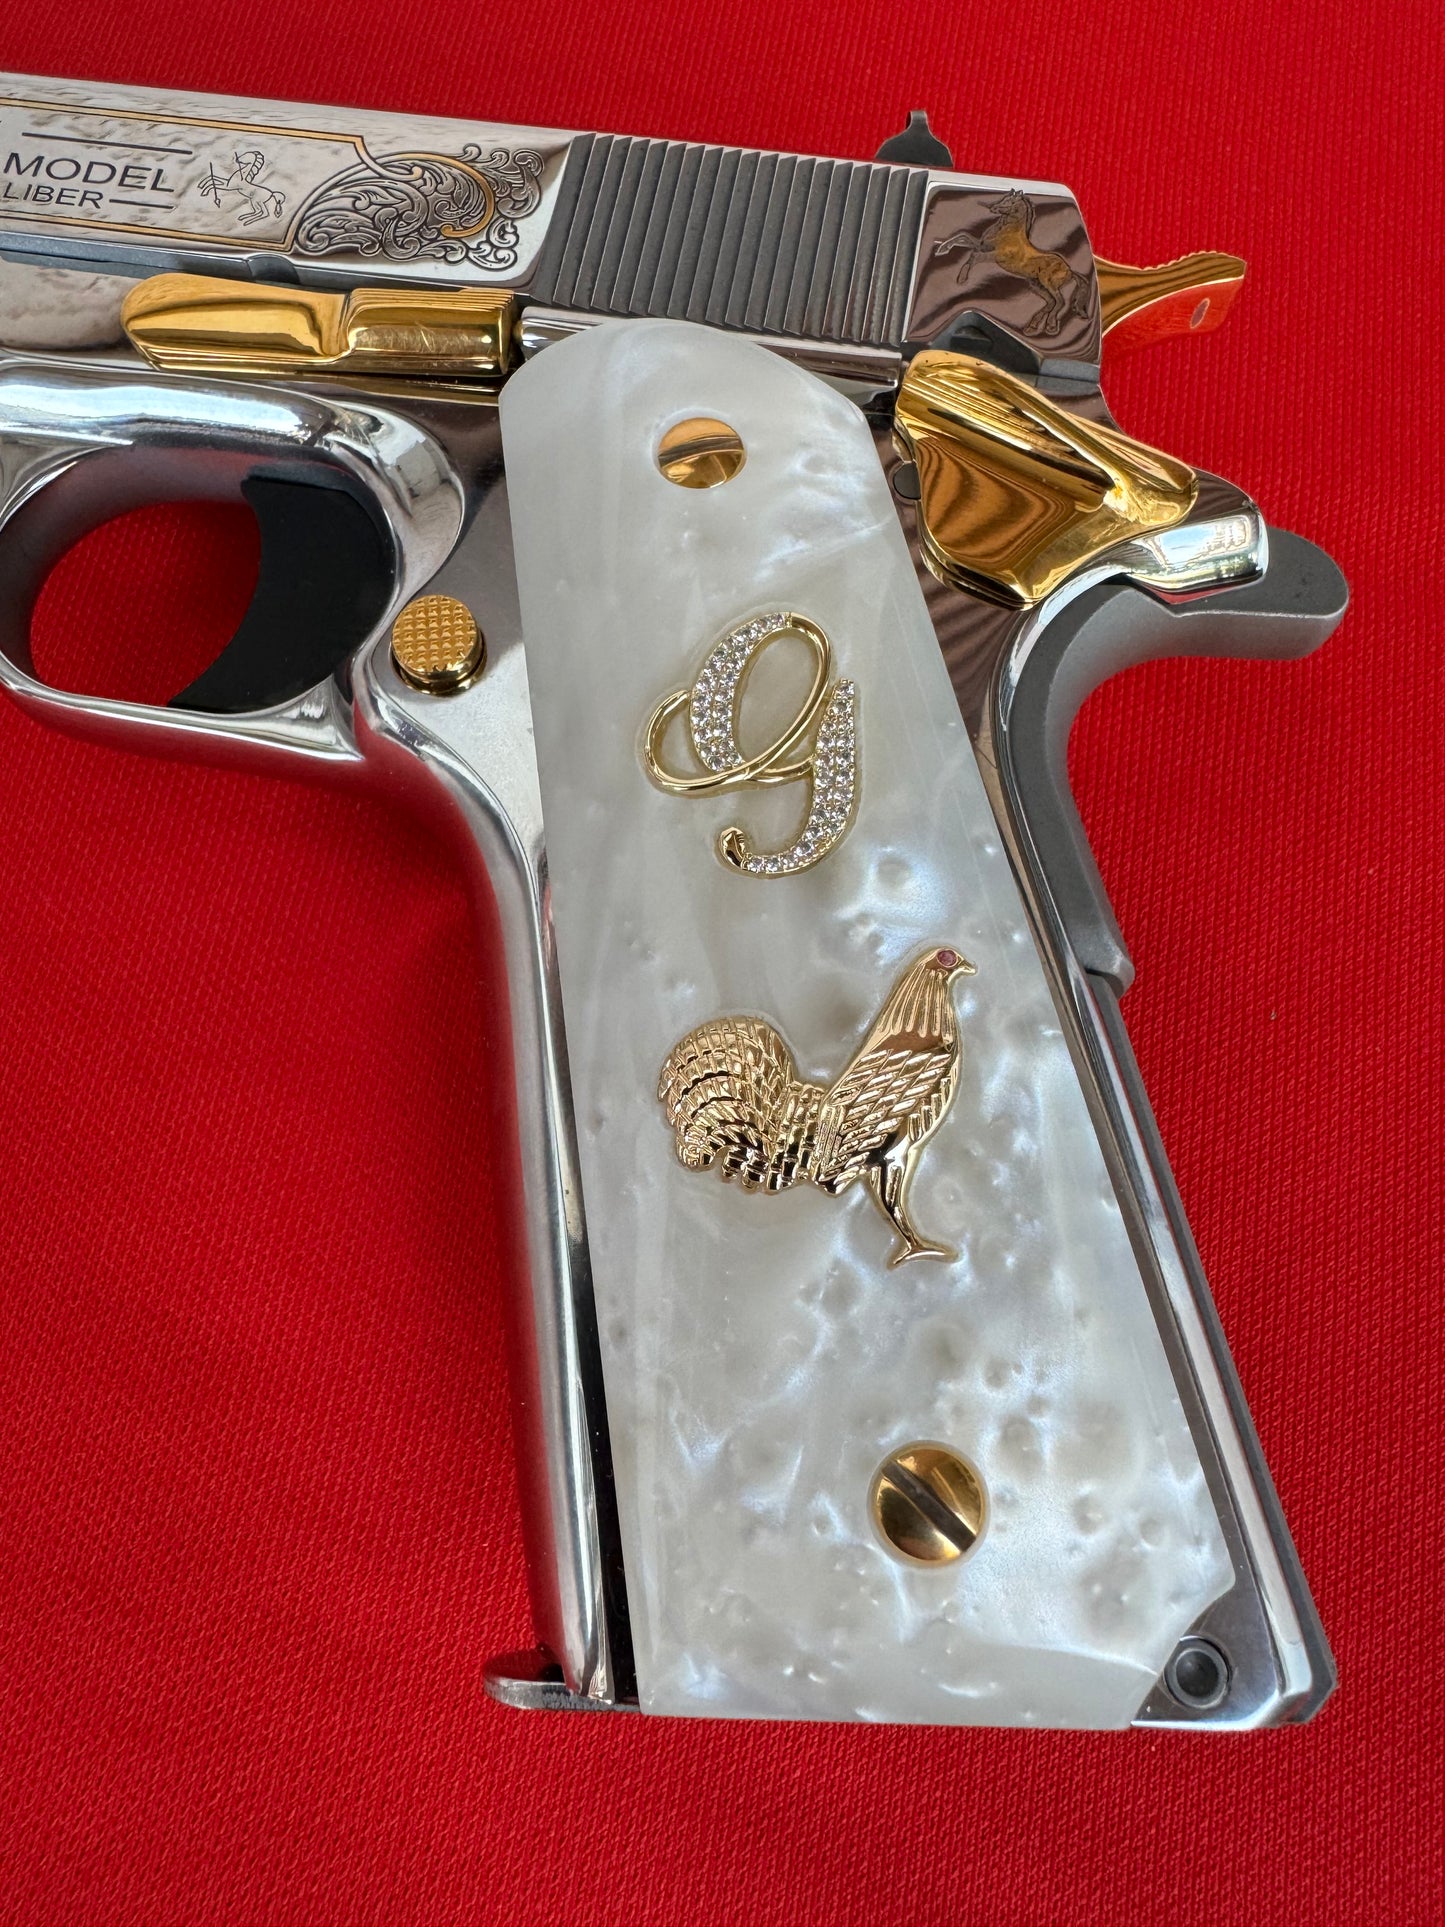 1911 Rooster “G” 24k Gold Plated Inlayed CZ stones Grips  White Pearl Grips